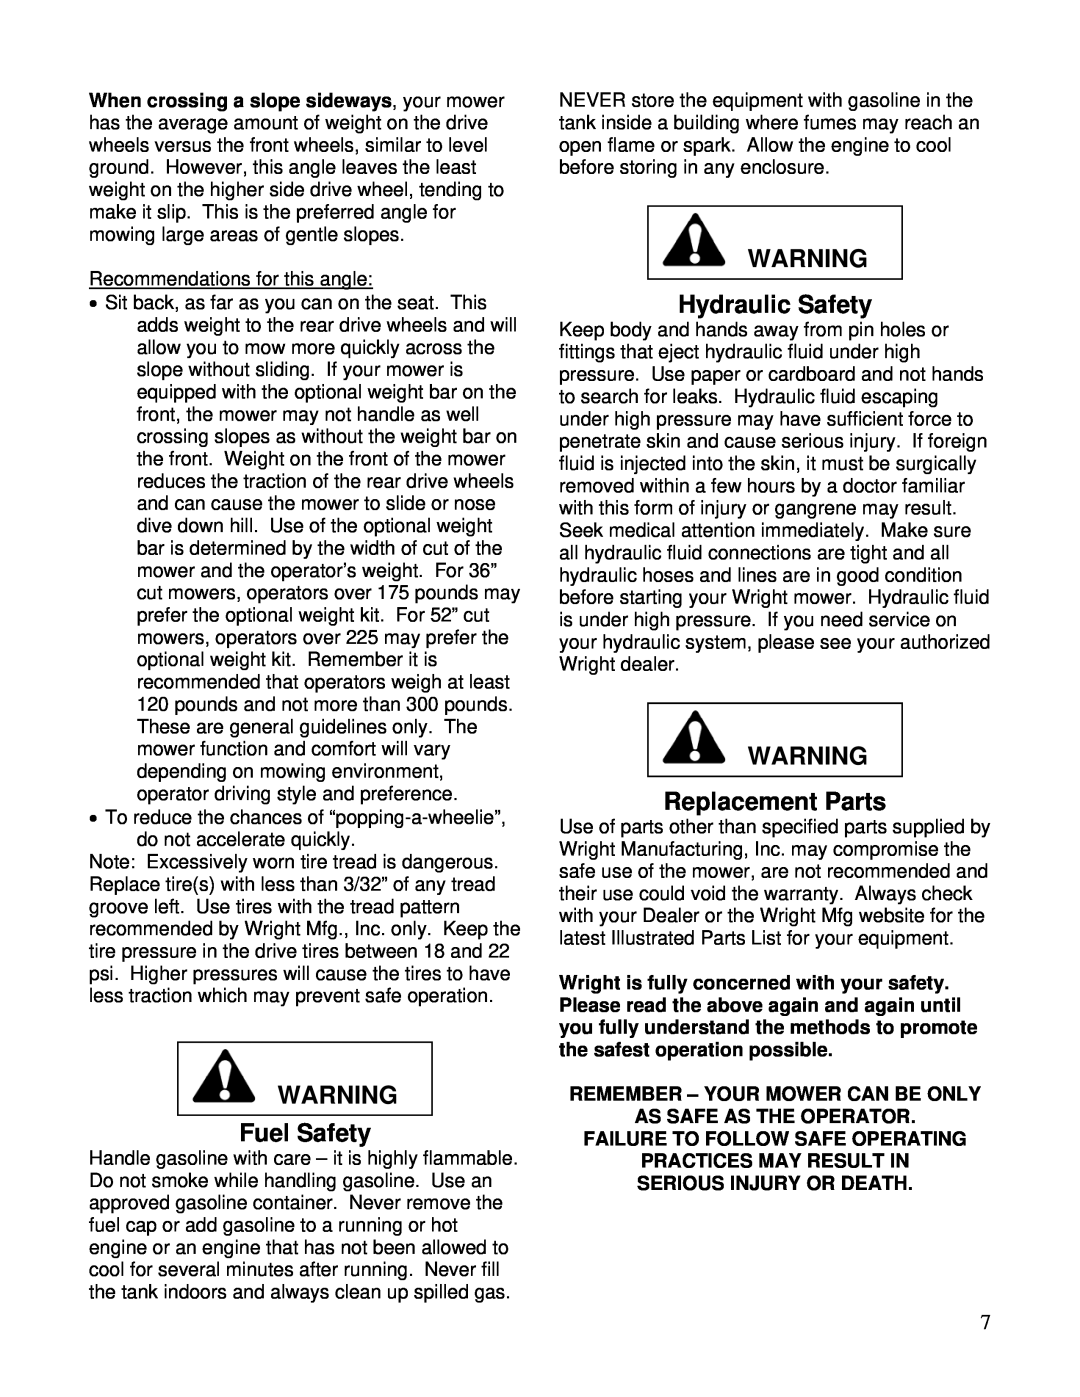 Wright Manufacturing 26077 owner manual Fuel Safety, Hydraulic Safety, Replacement Parts, Remember - Your Mower Can Be Only 